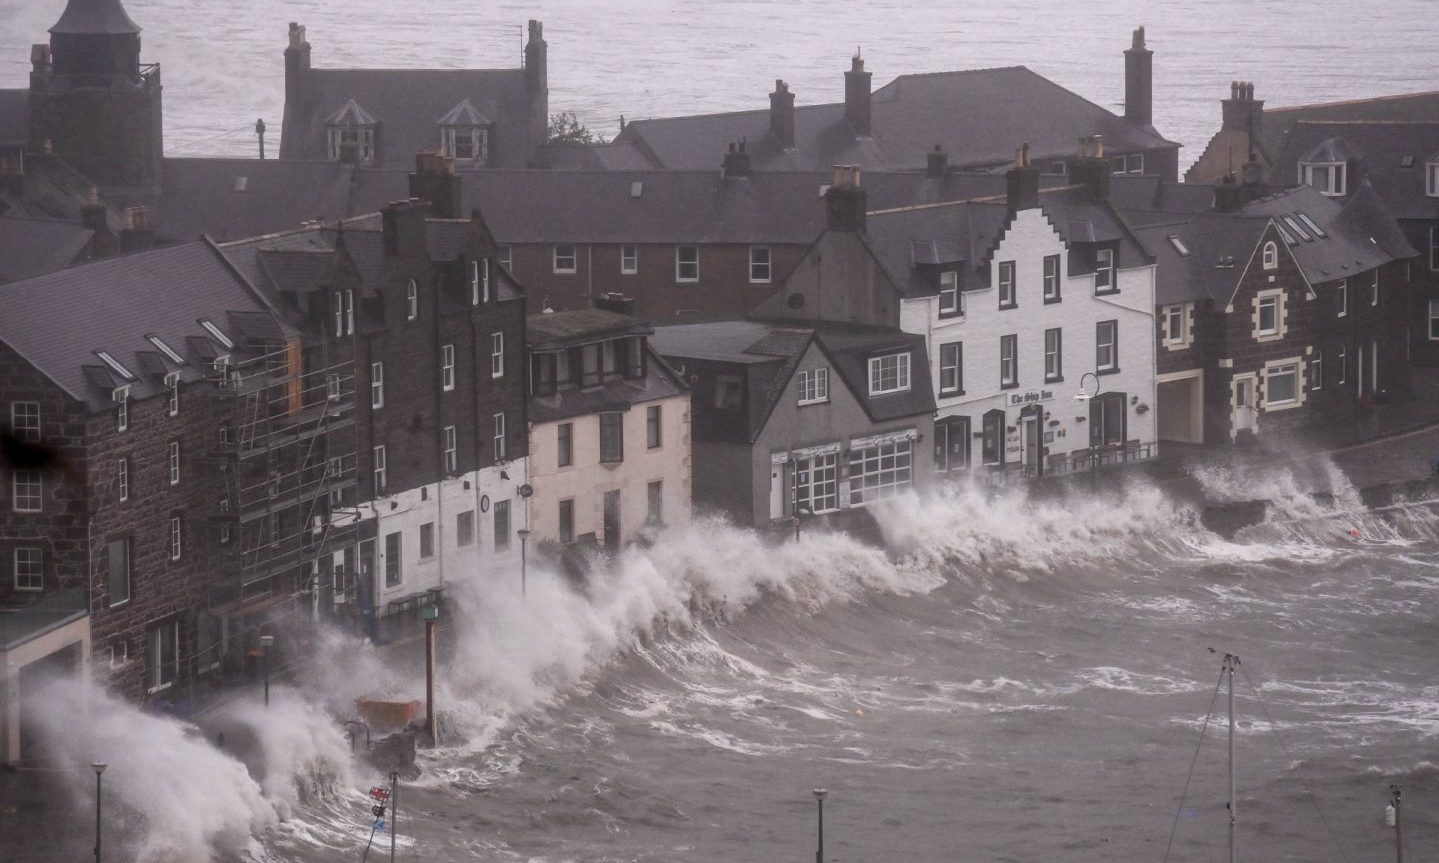 Waves blown up against the buildings on the seafront in Stonehaven. 